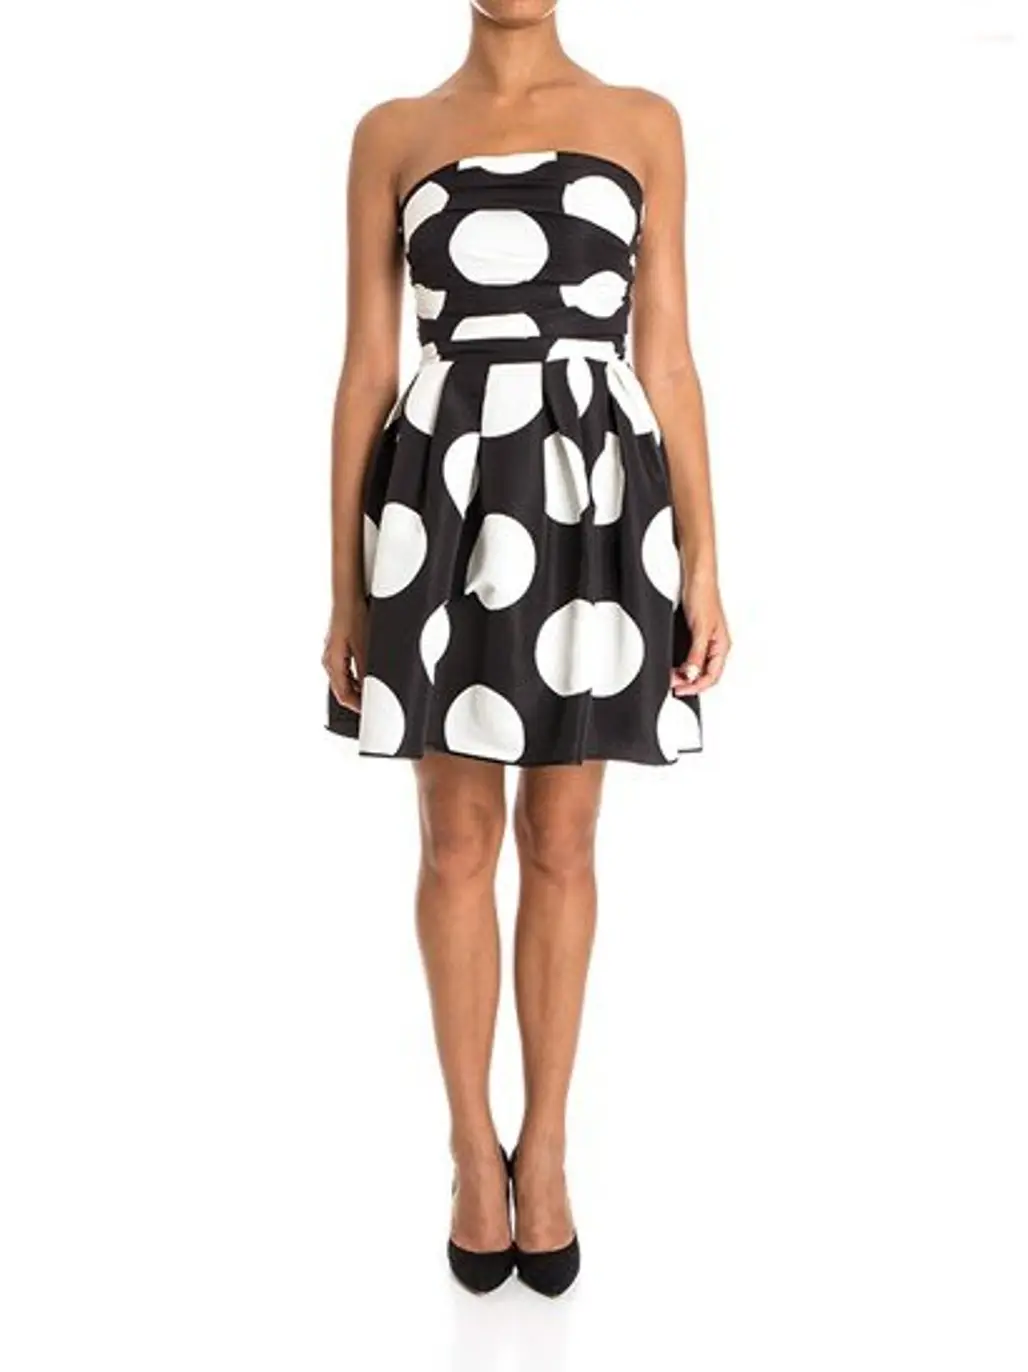 Go Big and Bold with Your Polka Dots